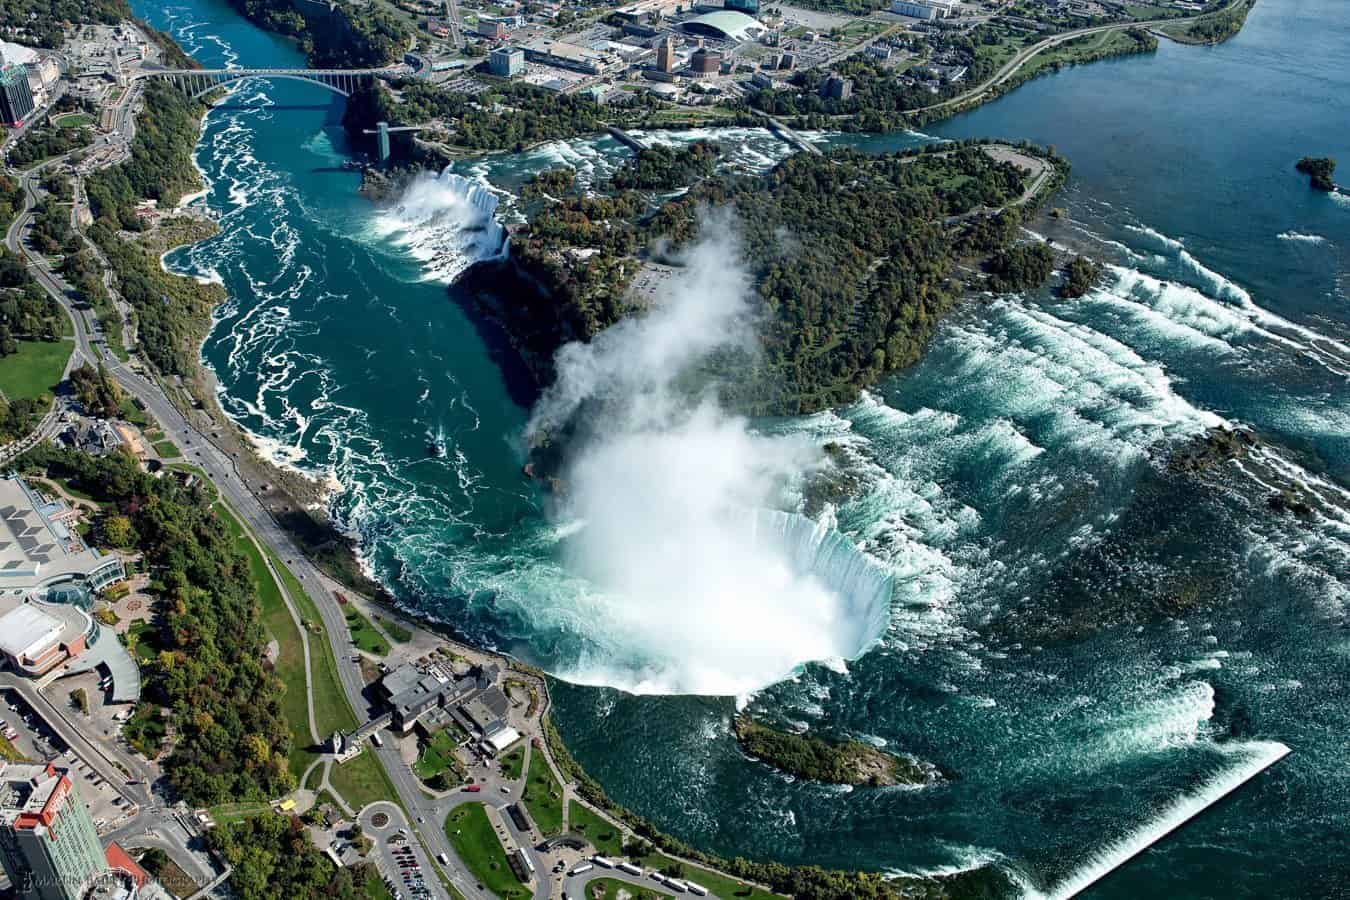 Niagara Falls from Helicopter